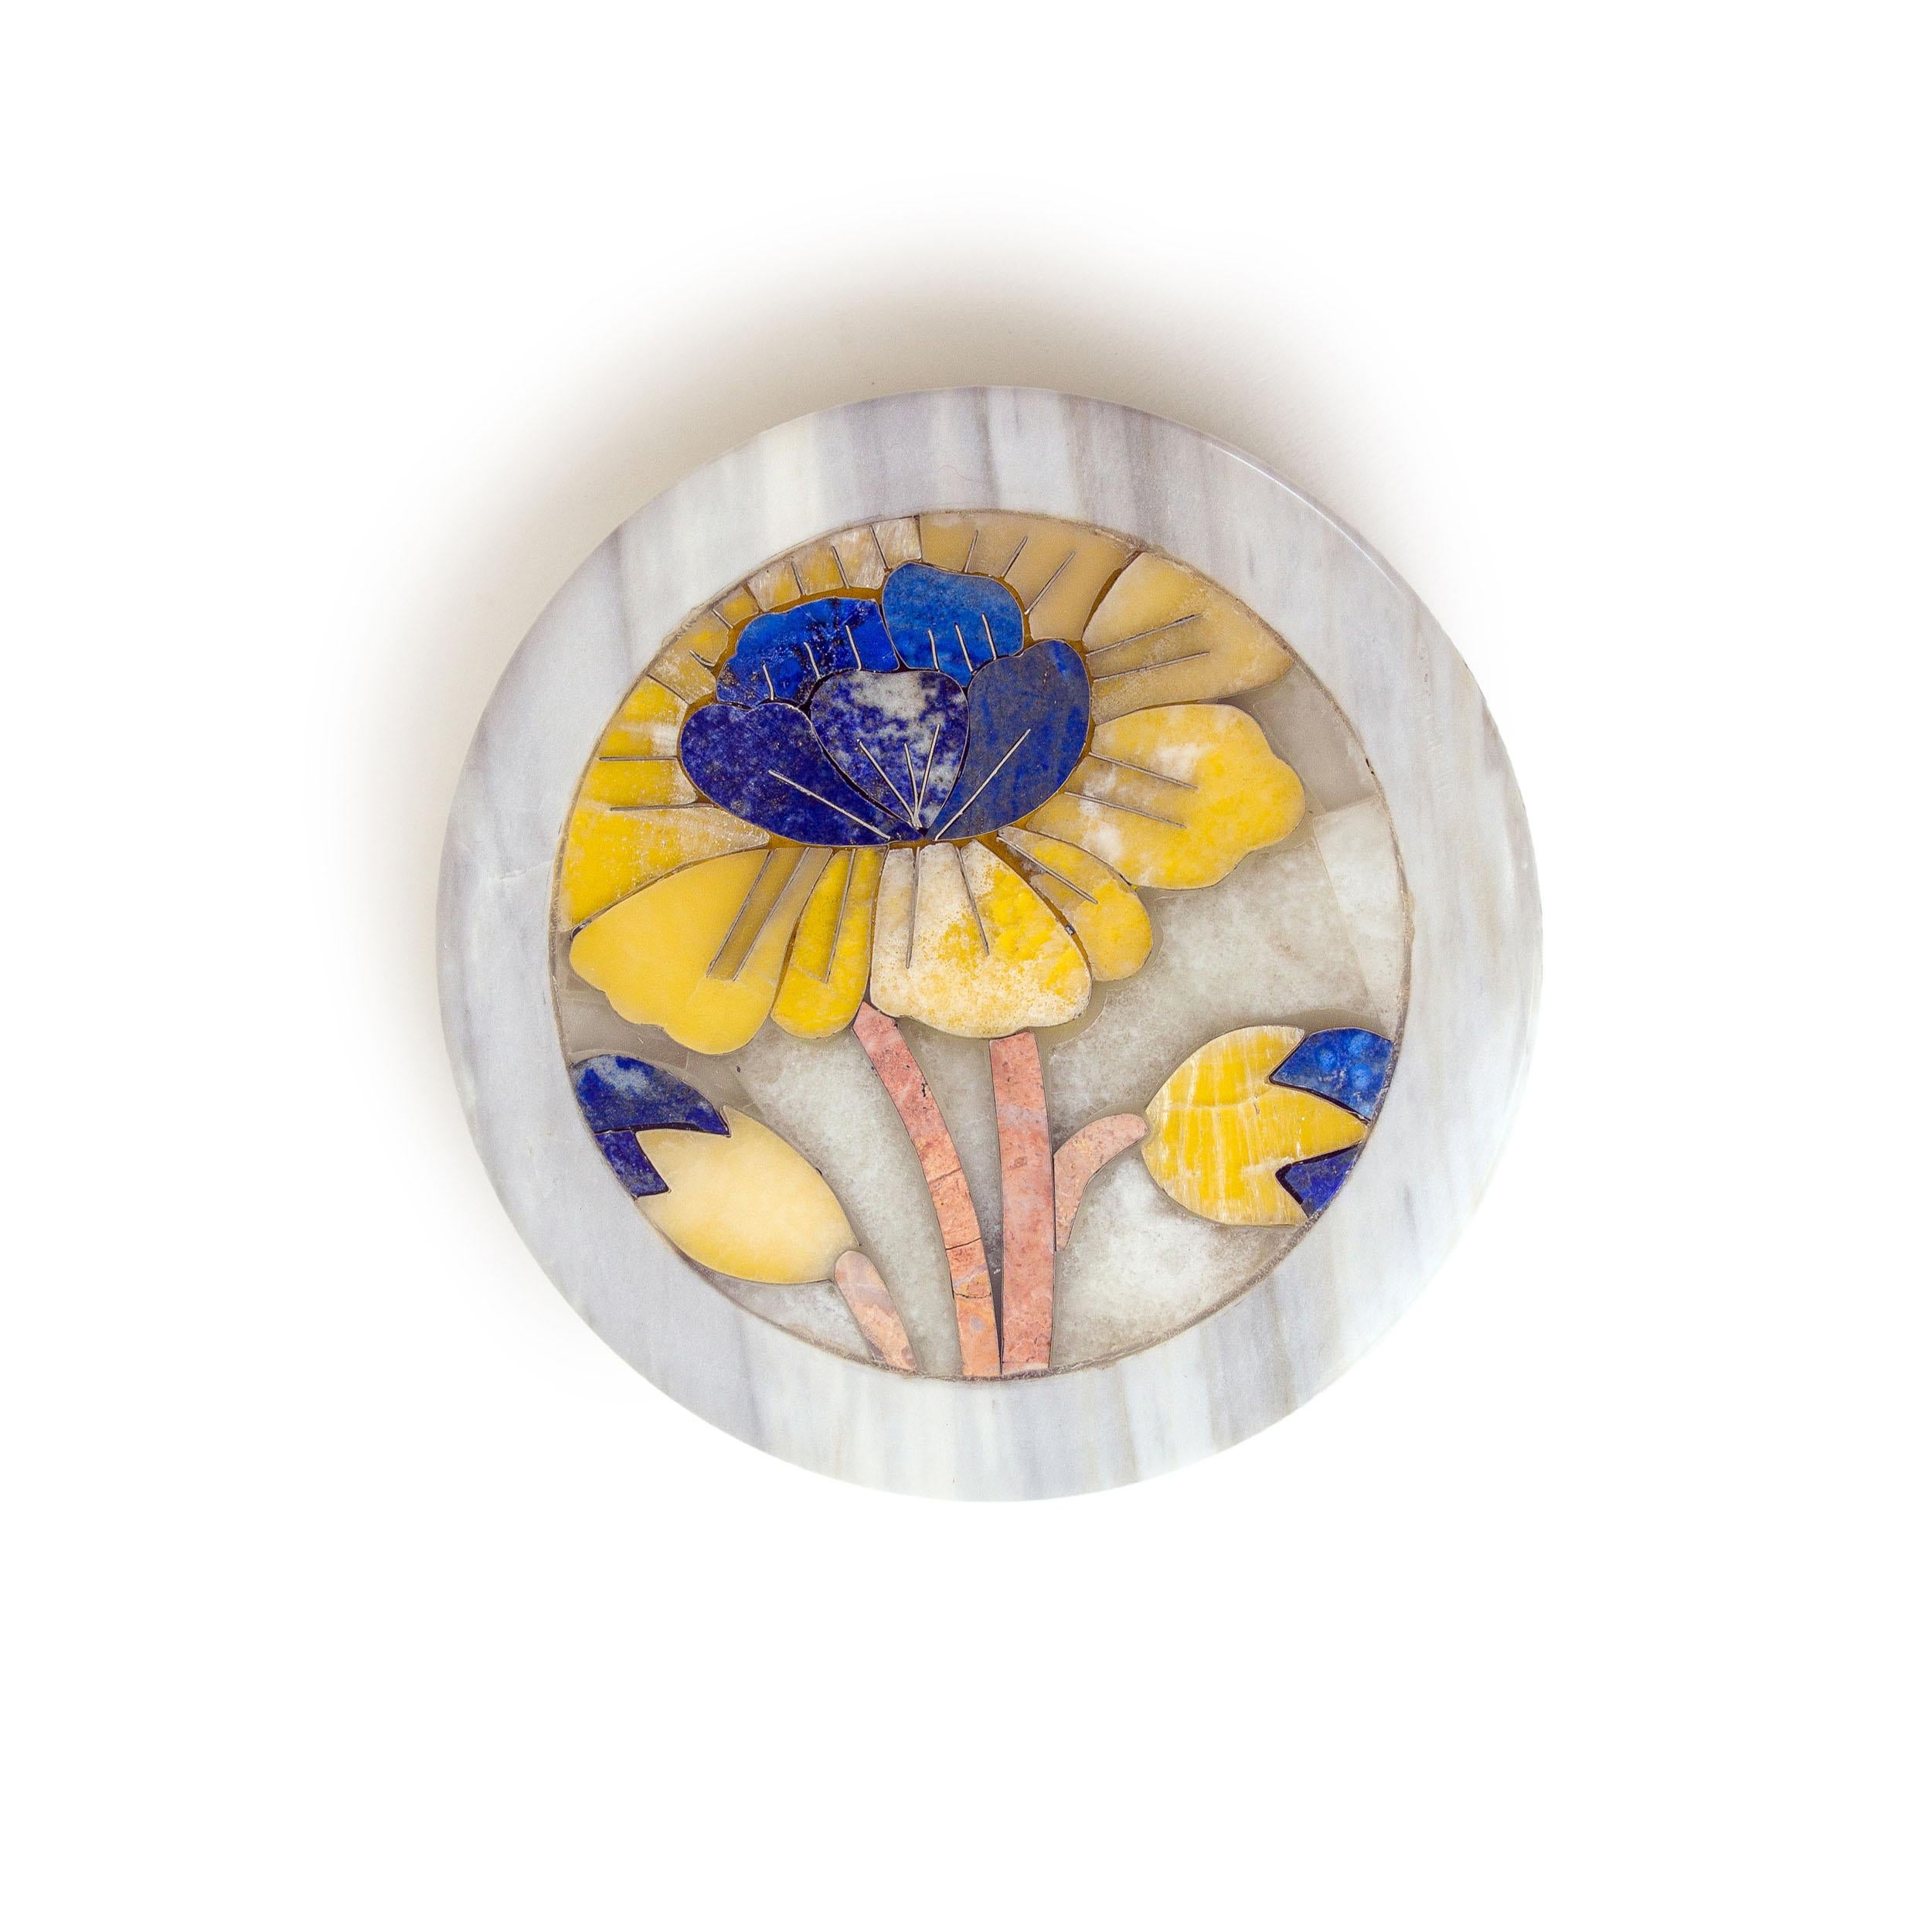 Puvvi box by Studio Lel
Dimensions: D 12.7 x W 12.7 x H 5 cm
Materials: Lapis Lazuli, onyx, marble.

From the Urdu word for the chrysanthemum flower, our Vogue-featuring Puvvi collection is a lively celebration of femininity. The collection